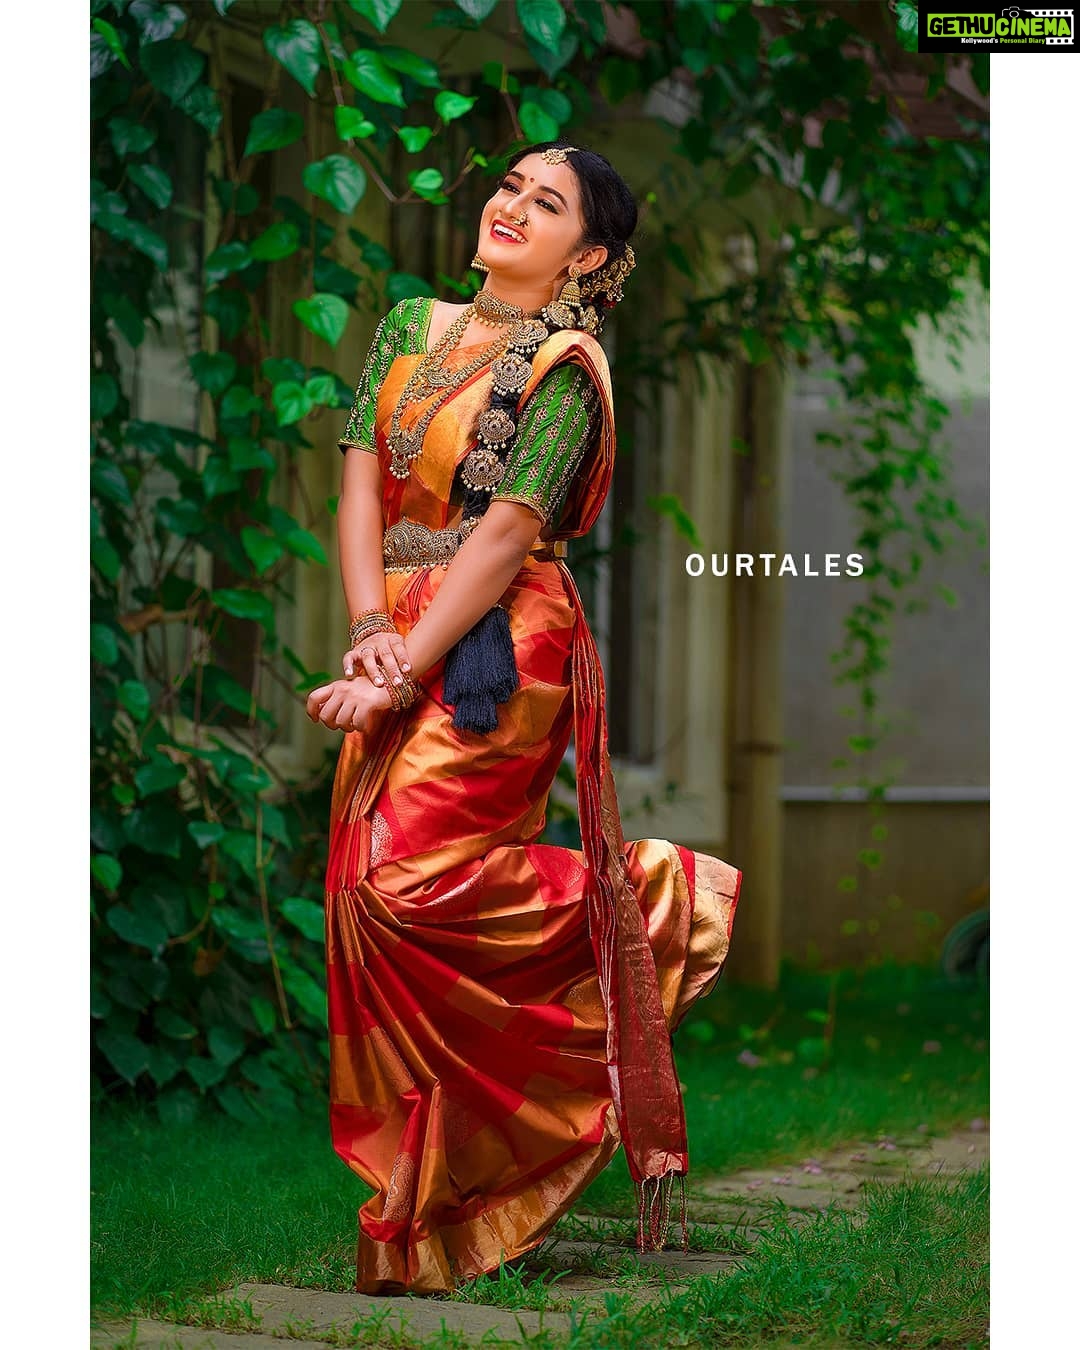 Raveena Daha Instagram - Can't get over this picture ❤ I'm obsessed! MUA &  HAIRSTYLE💄: @shadows_makeover_artistry JEWELLERY📿:@chennai_jazz SAREE AND  BLOUSE💃:@d3boutiquee SHOT BY📸:@ourtales_barath - Gethu Cinema